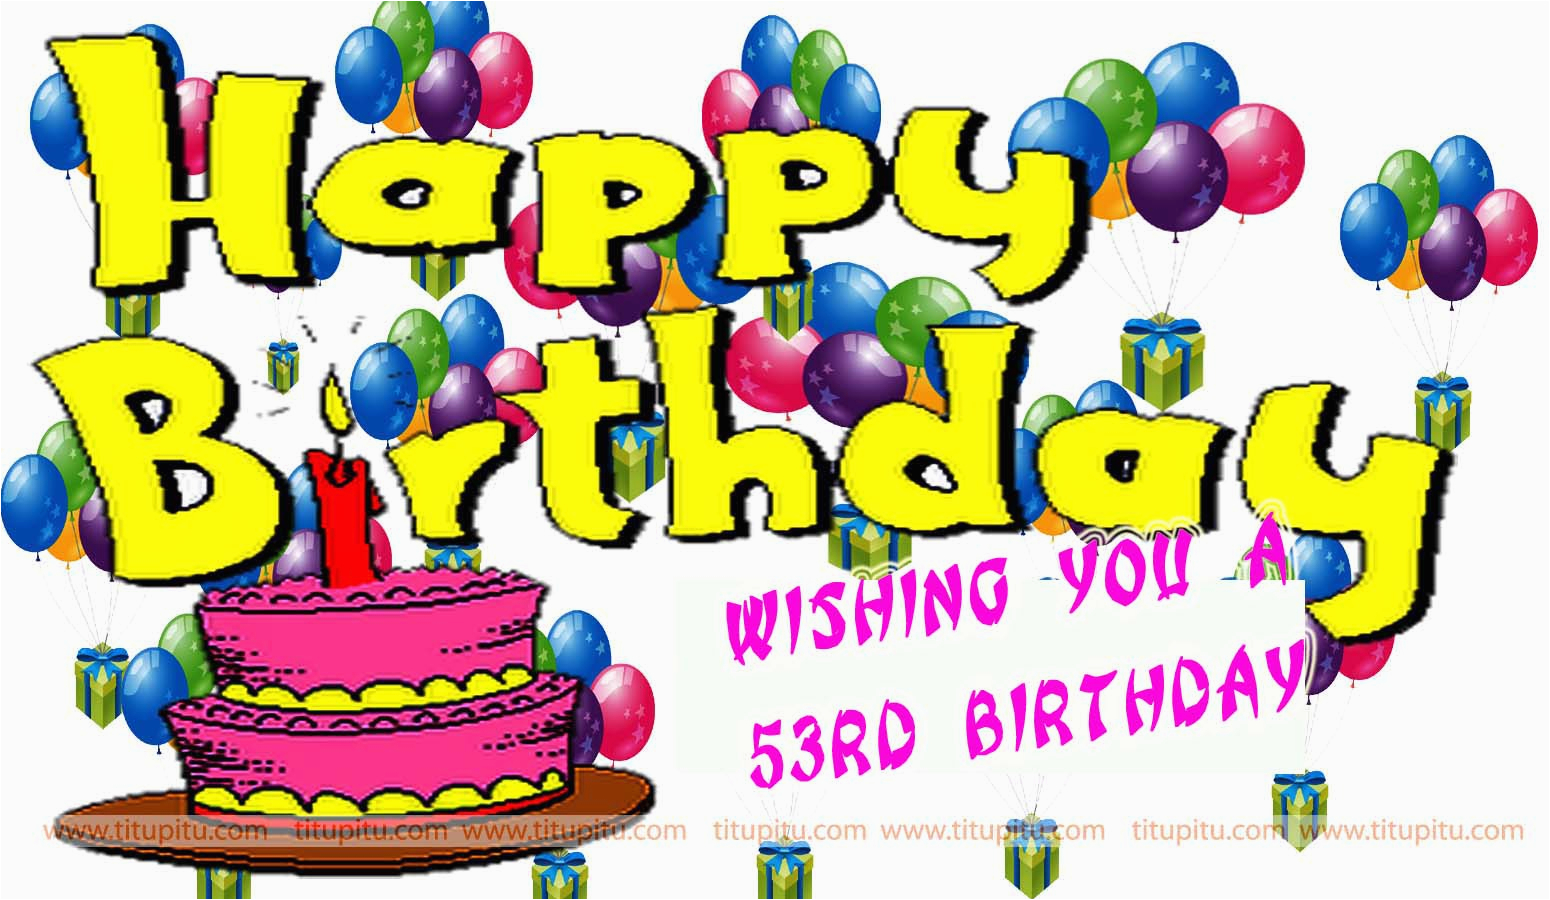 53rd birthday wishes message and